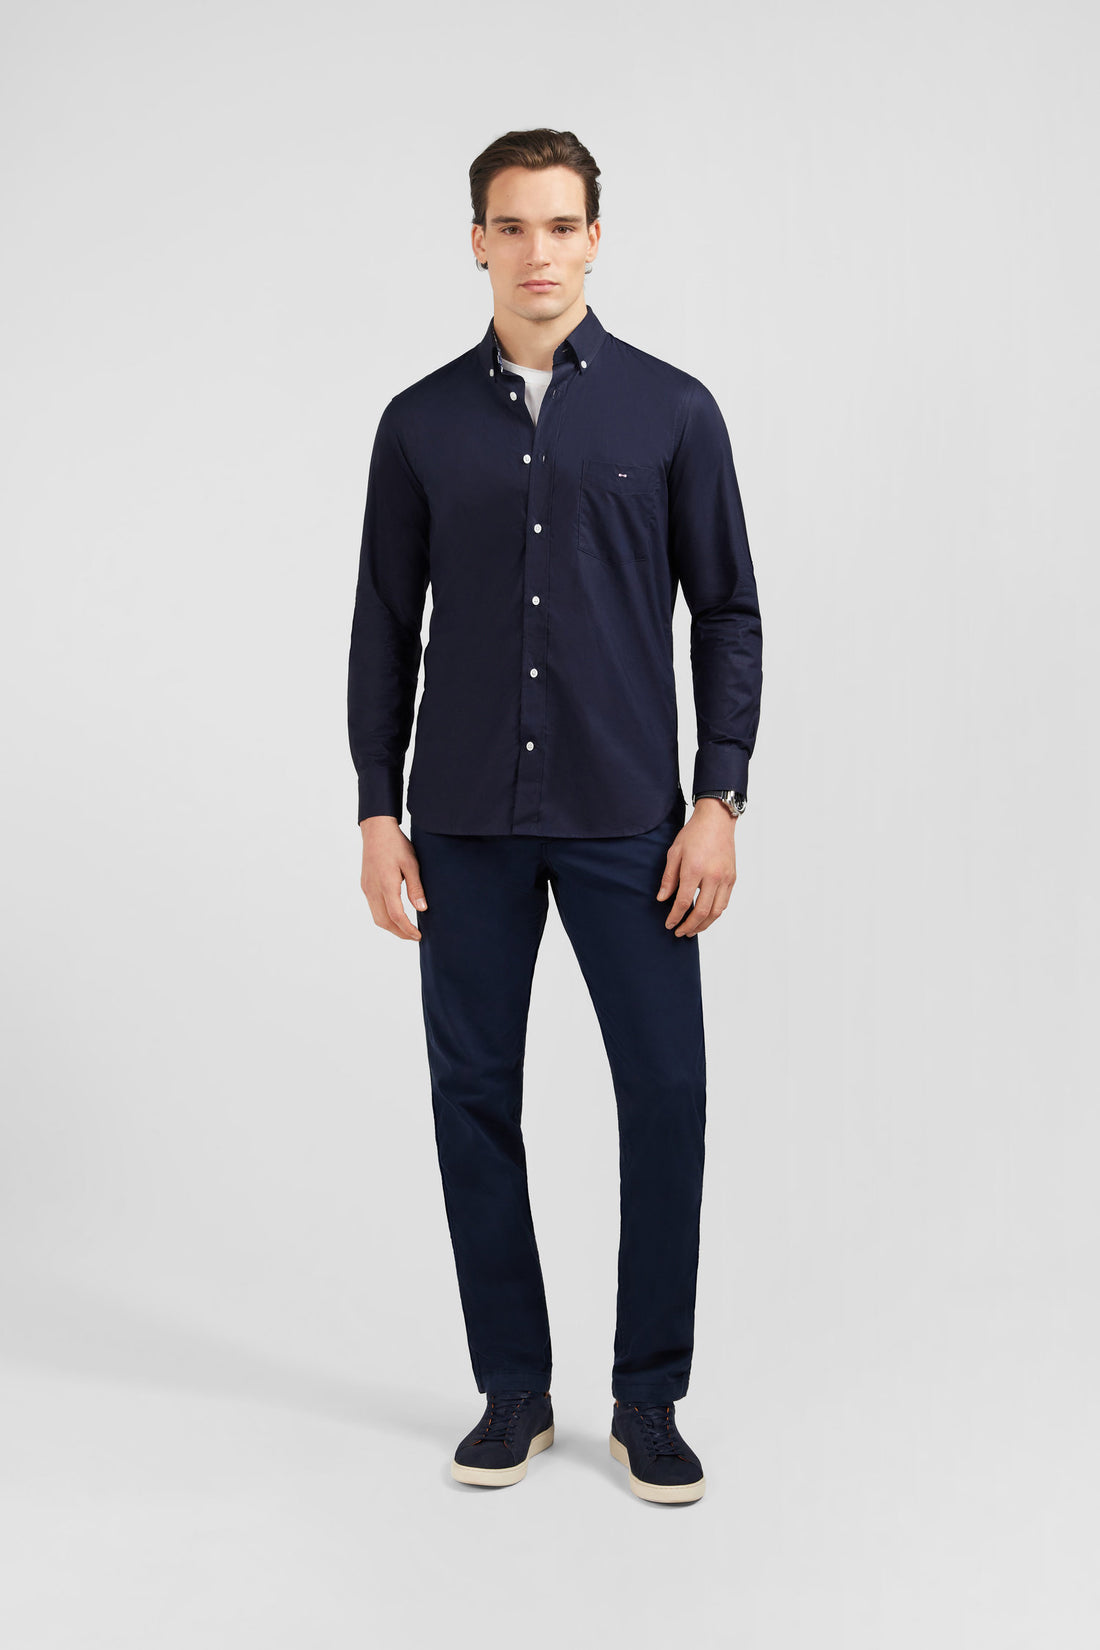 Navy Blue Shirt With Floral Elbow Patches_E24CHECL0004_BLF_01